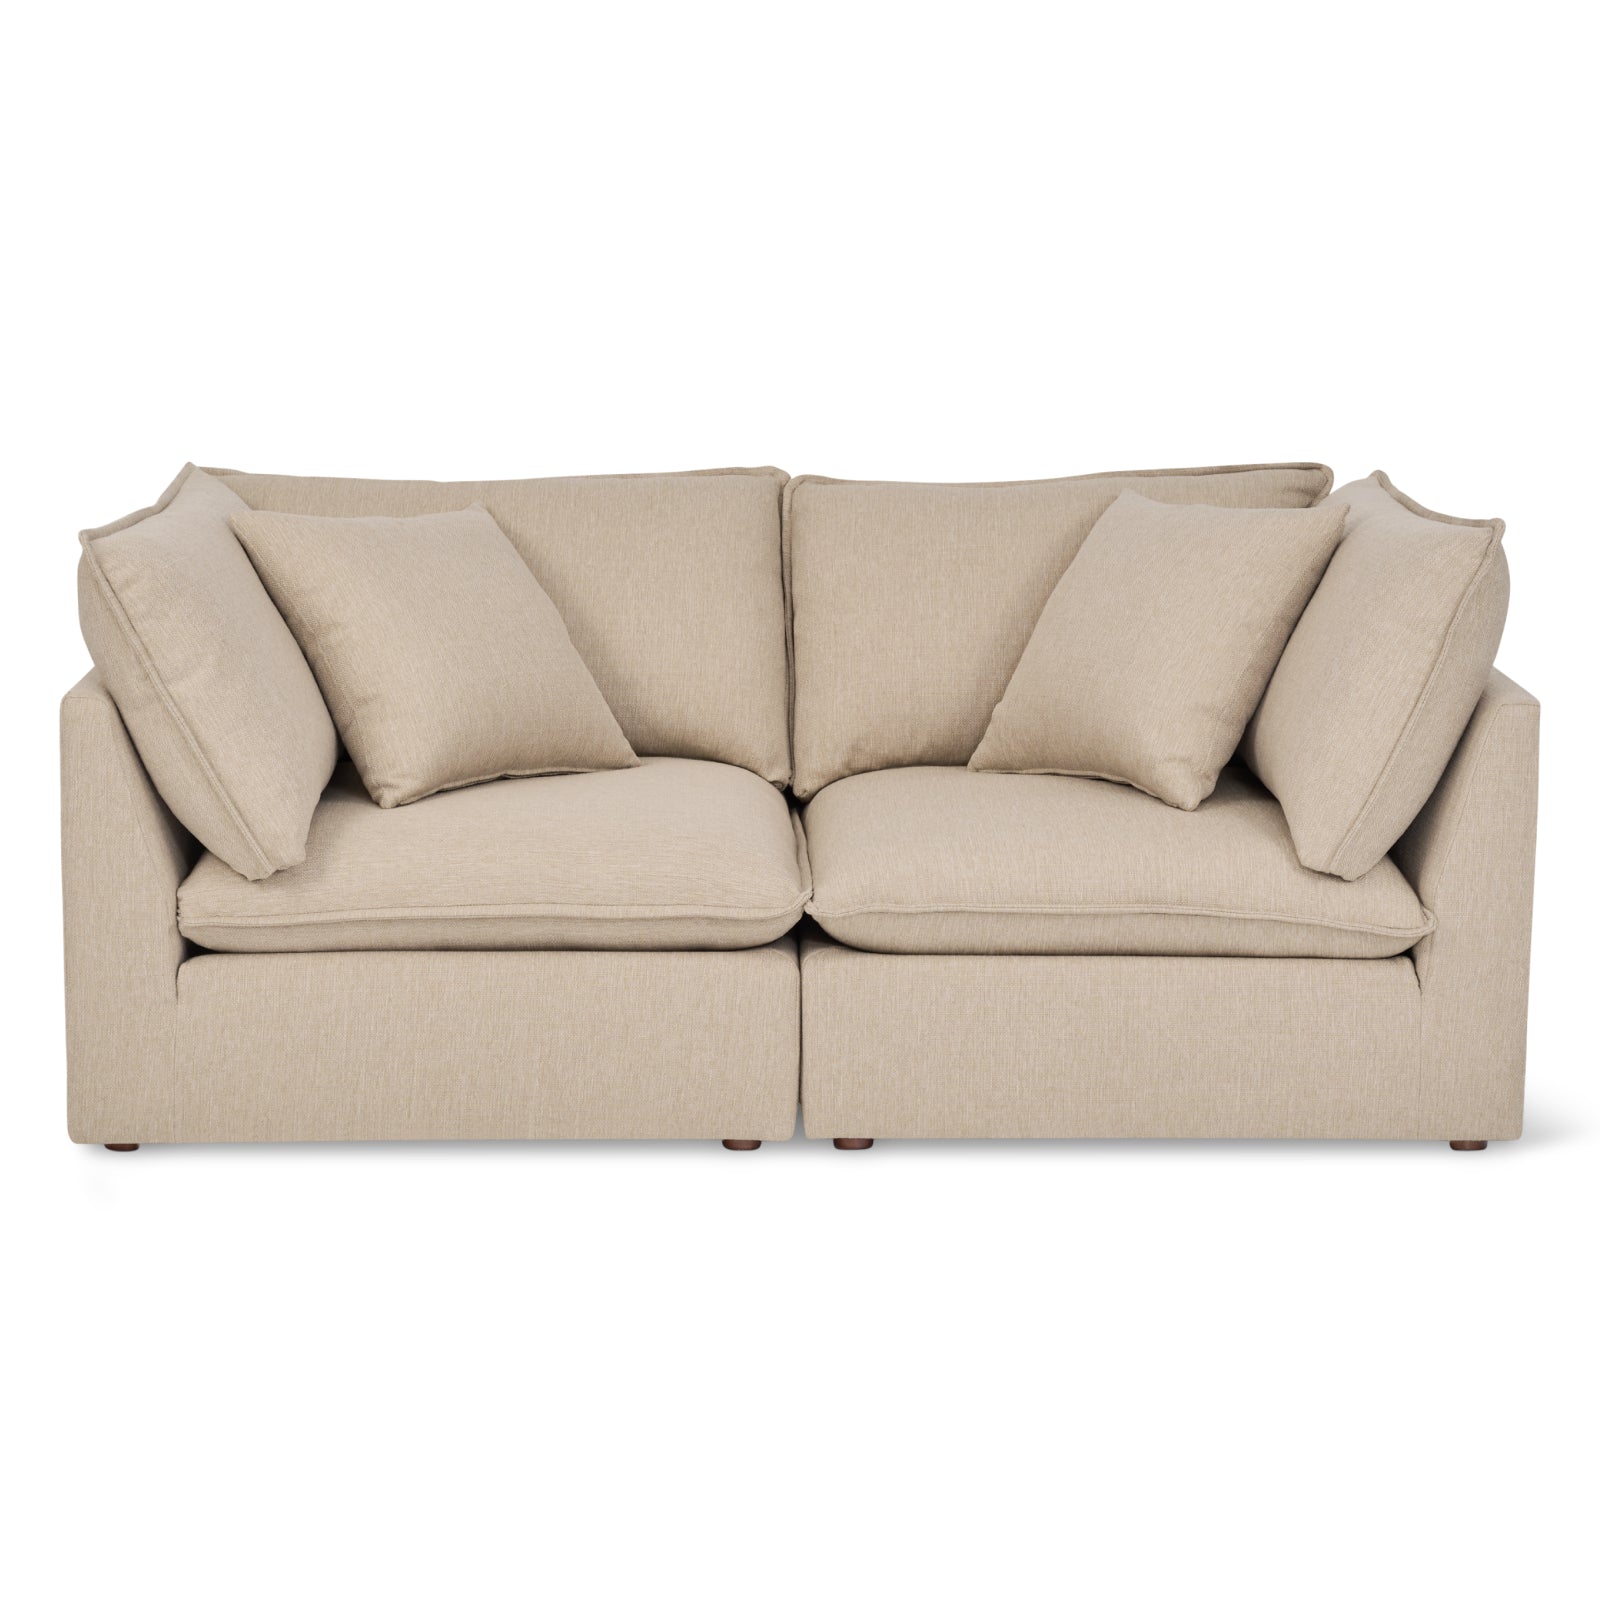 Chill Time 2-Piece Modular Sofa, Biscuit - Image 8